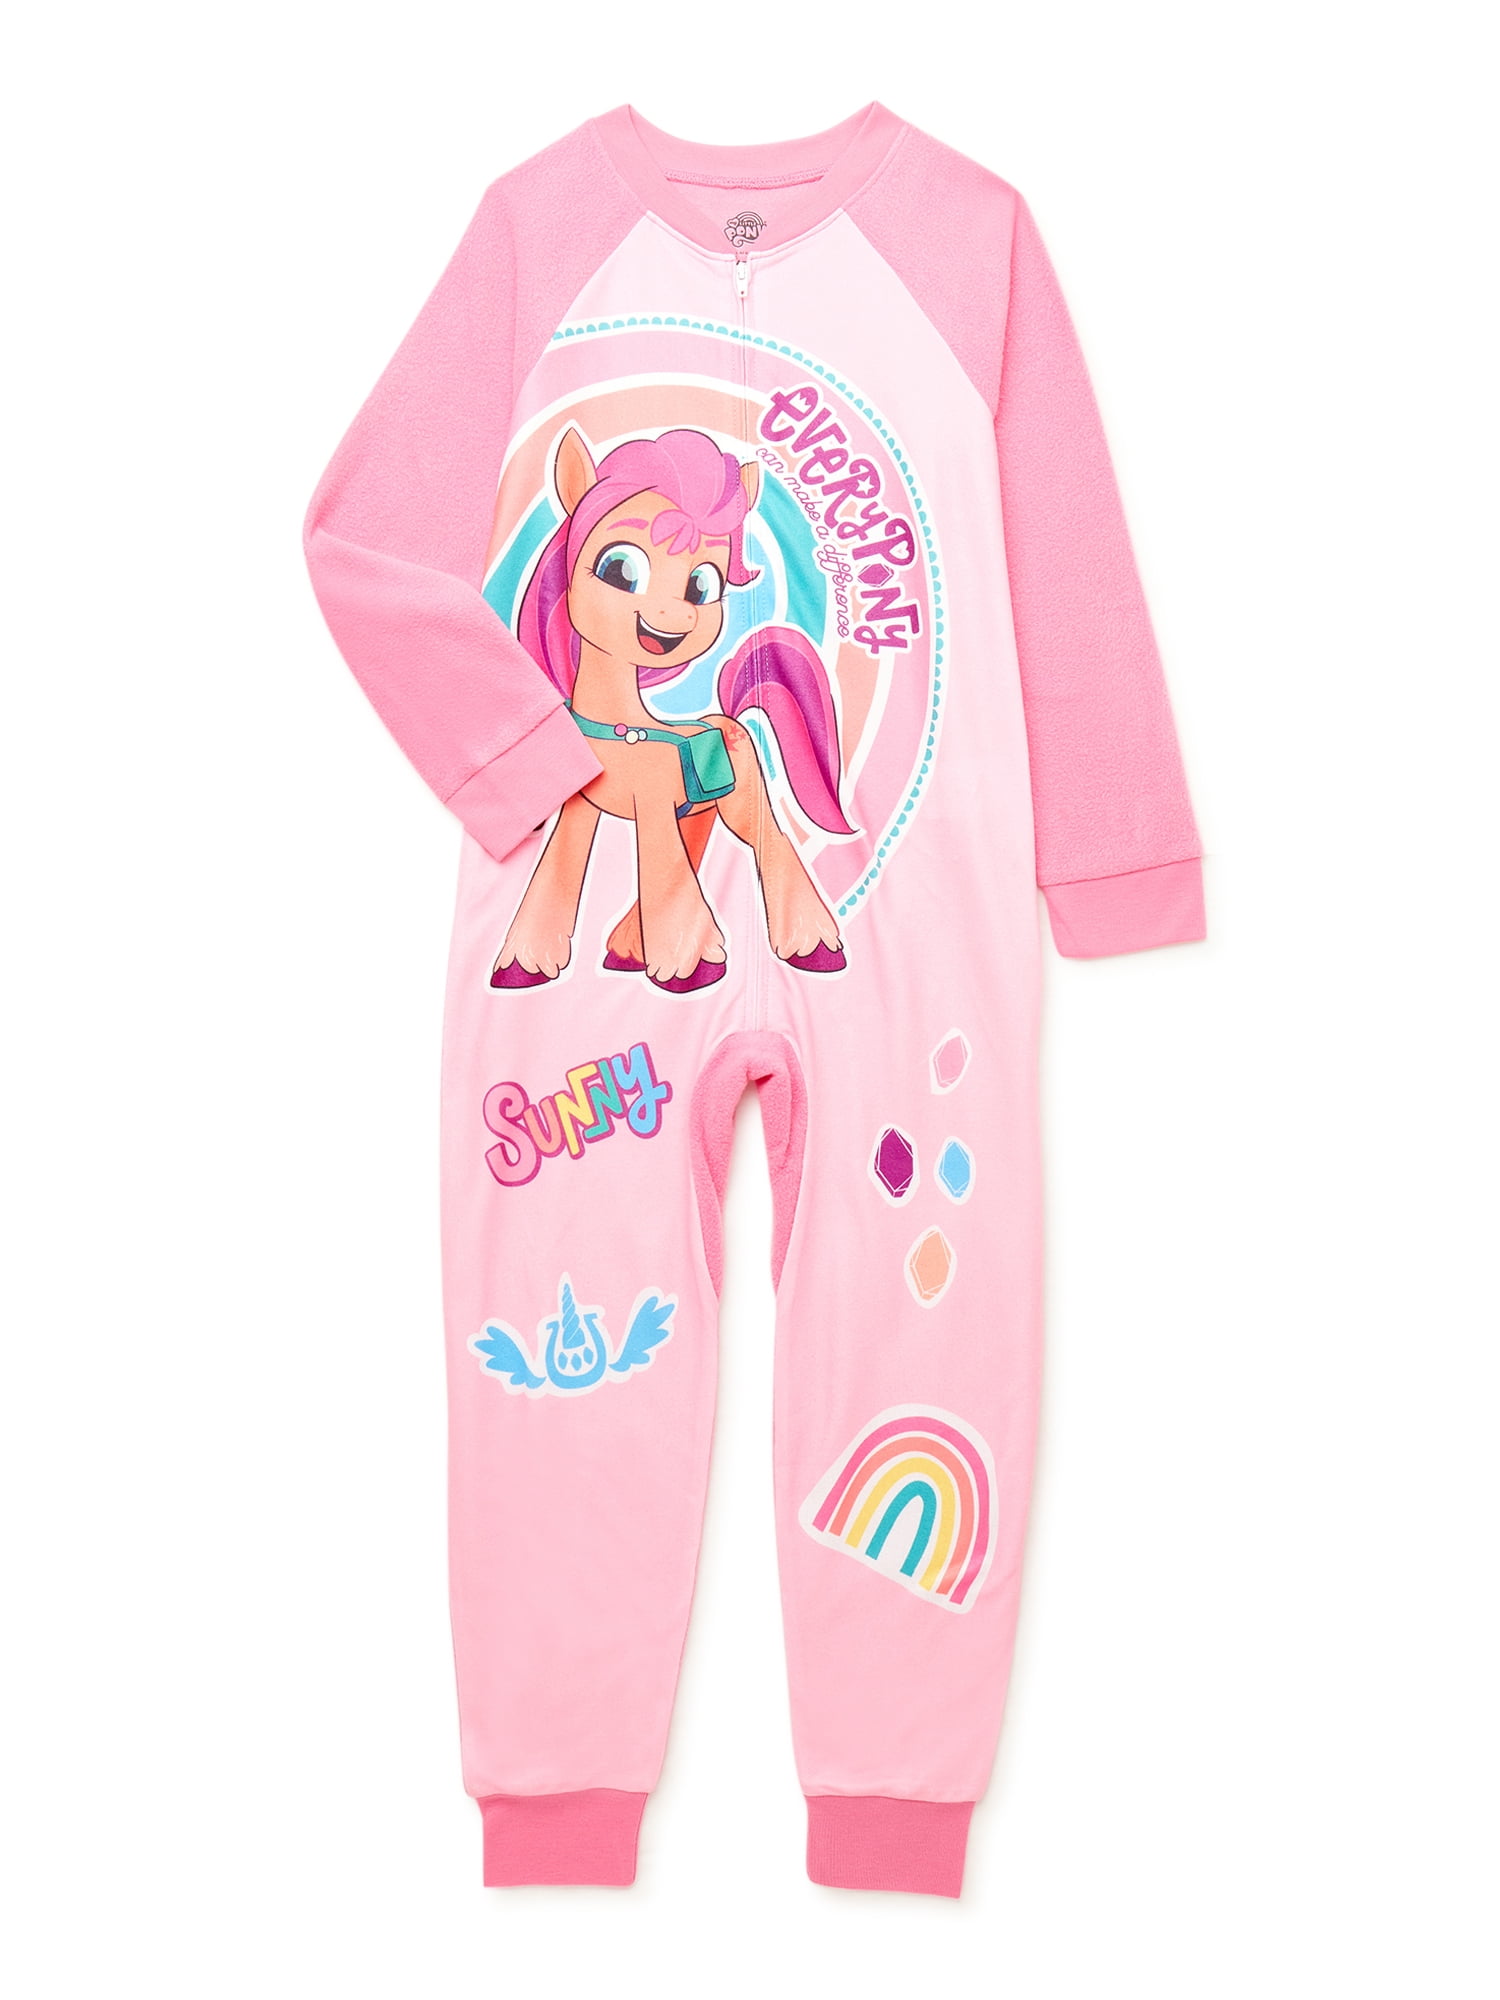 Paw Patrol Boys Union Suit Onsie Pajama with Slippers Bundle,100% Polyester,Toddler Size 2T to 5T 